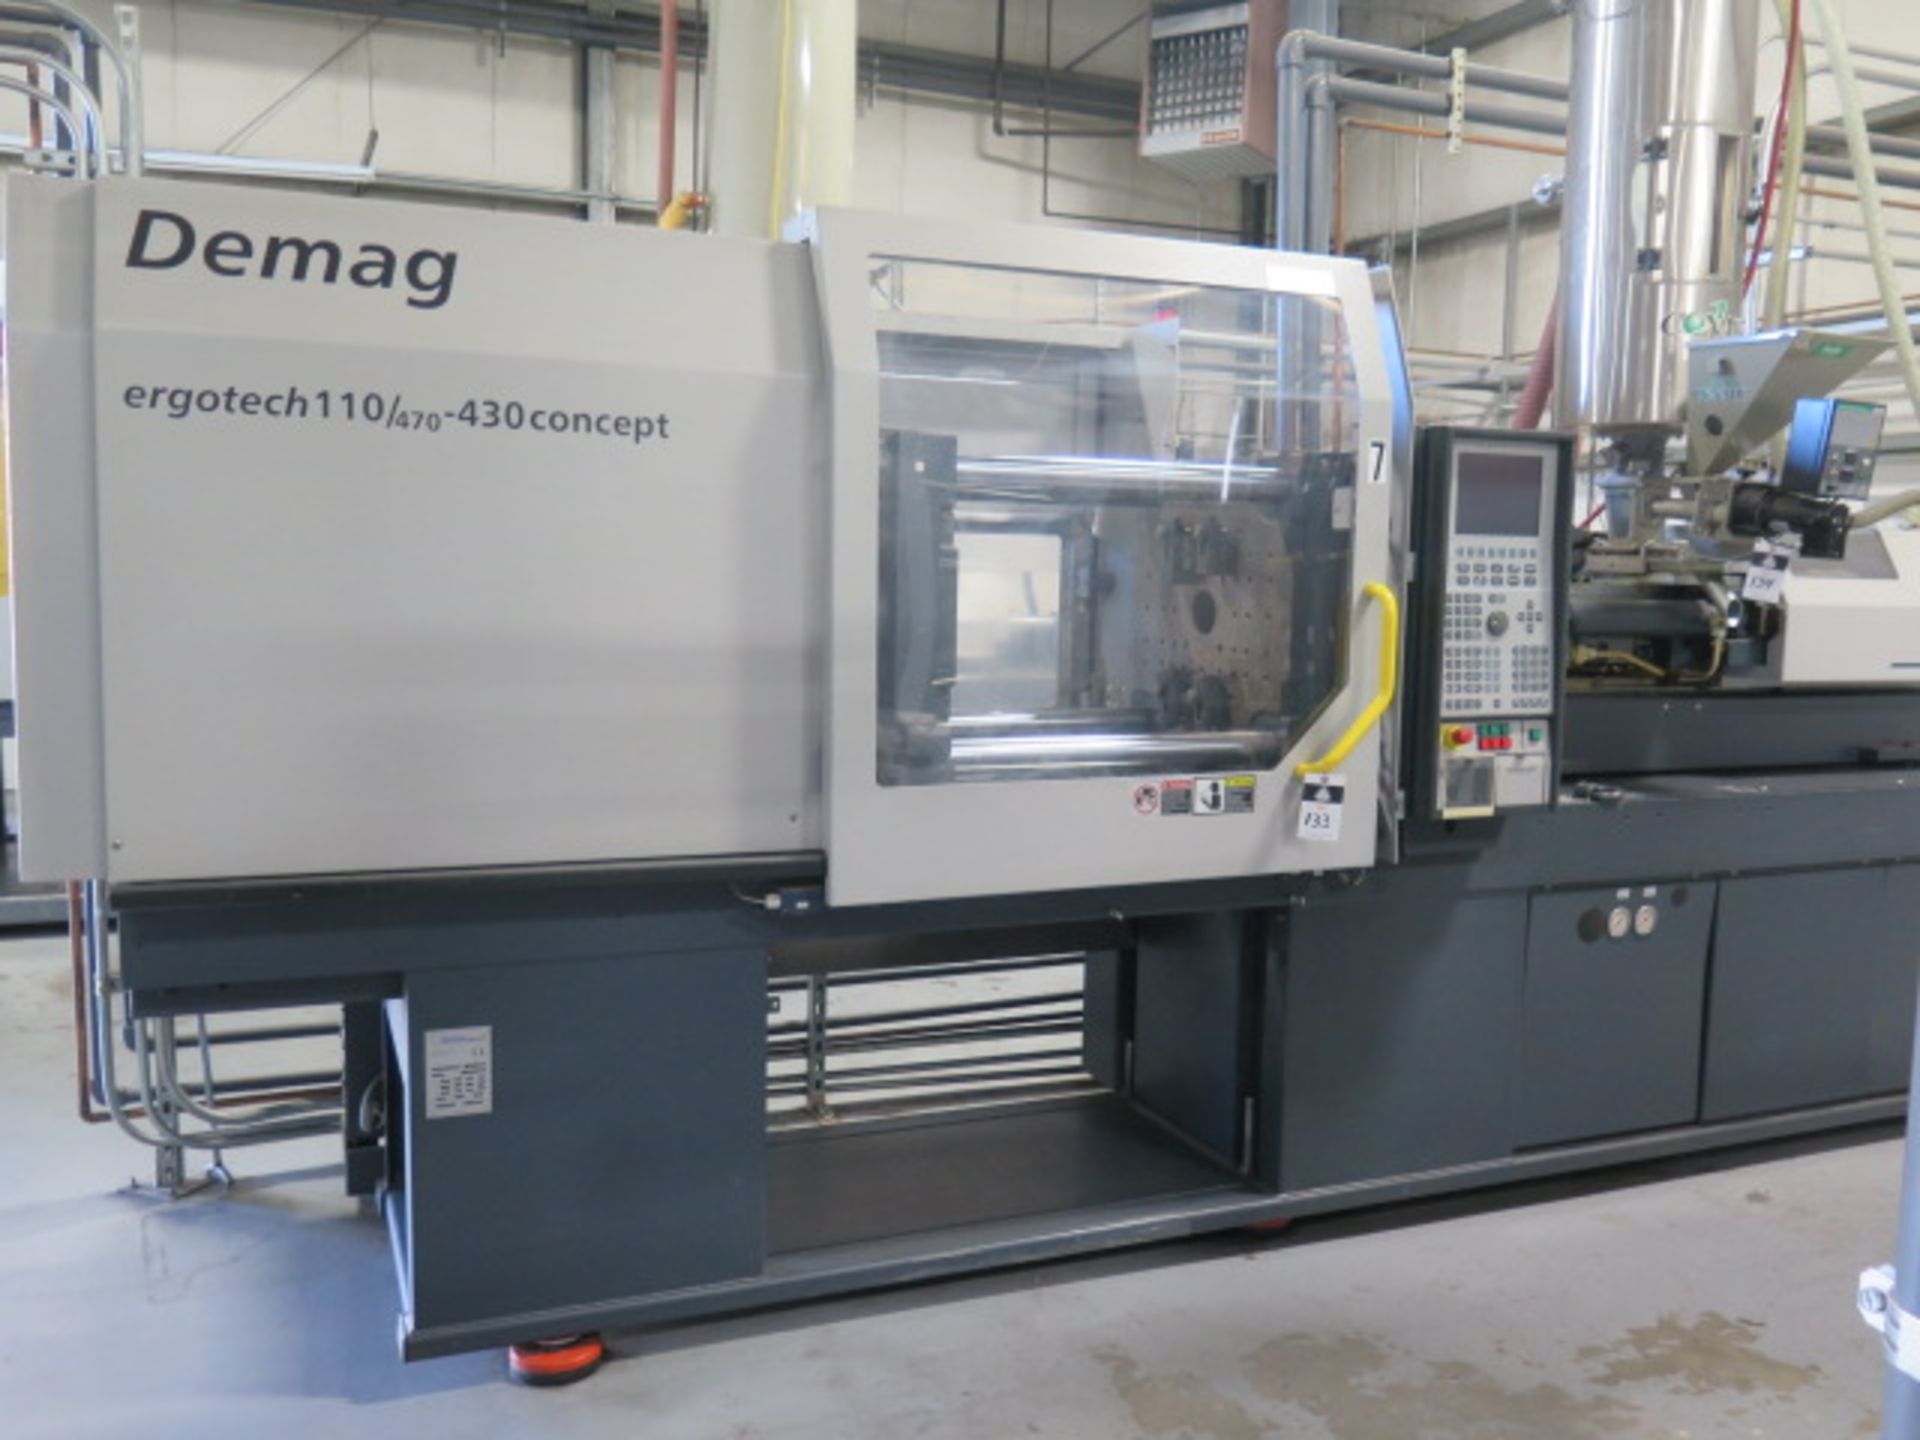 2000 Demag Ergotech Concept 1100/470-430 110-Ton Plastic Injection Molding s/n 7173-0068, SOLD AS IS - Image 2 of 16